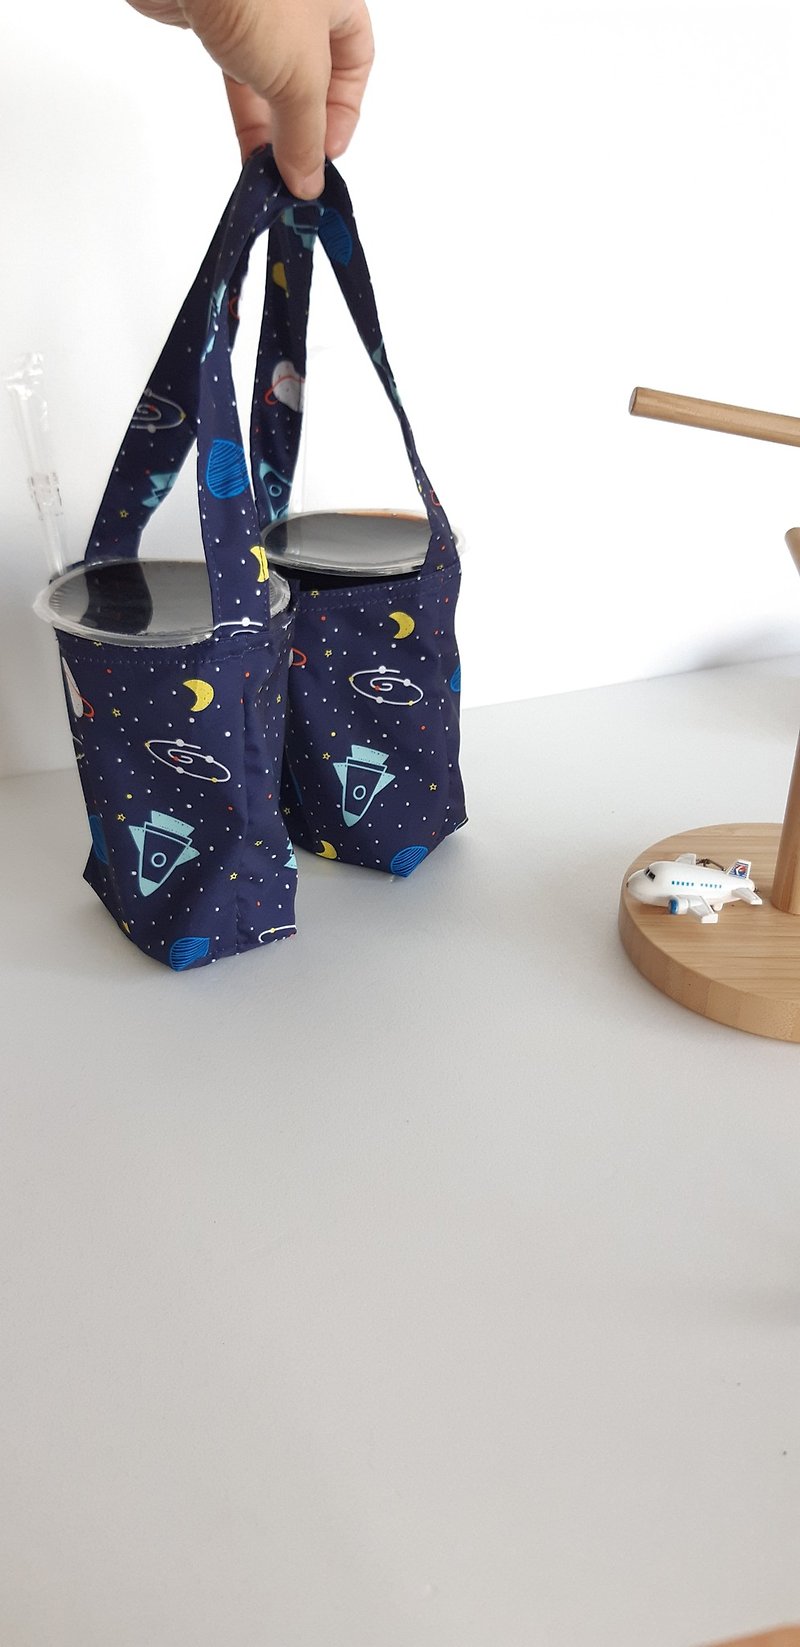 Interstellar Soaring 2 Eco-friendly Waterproof Beverage Bag_2 cups can be 1 cup_normal size ice dam cup size - Beverage Holders & Bags - Waterproof Material Blue